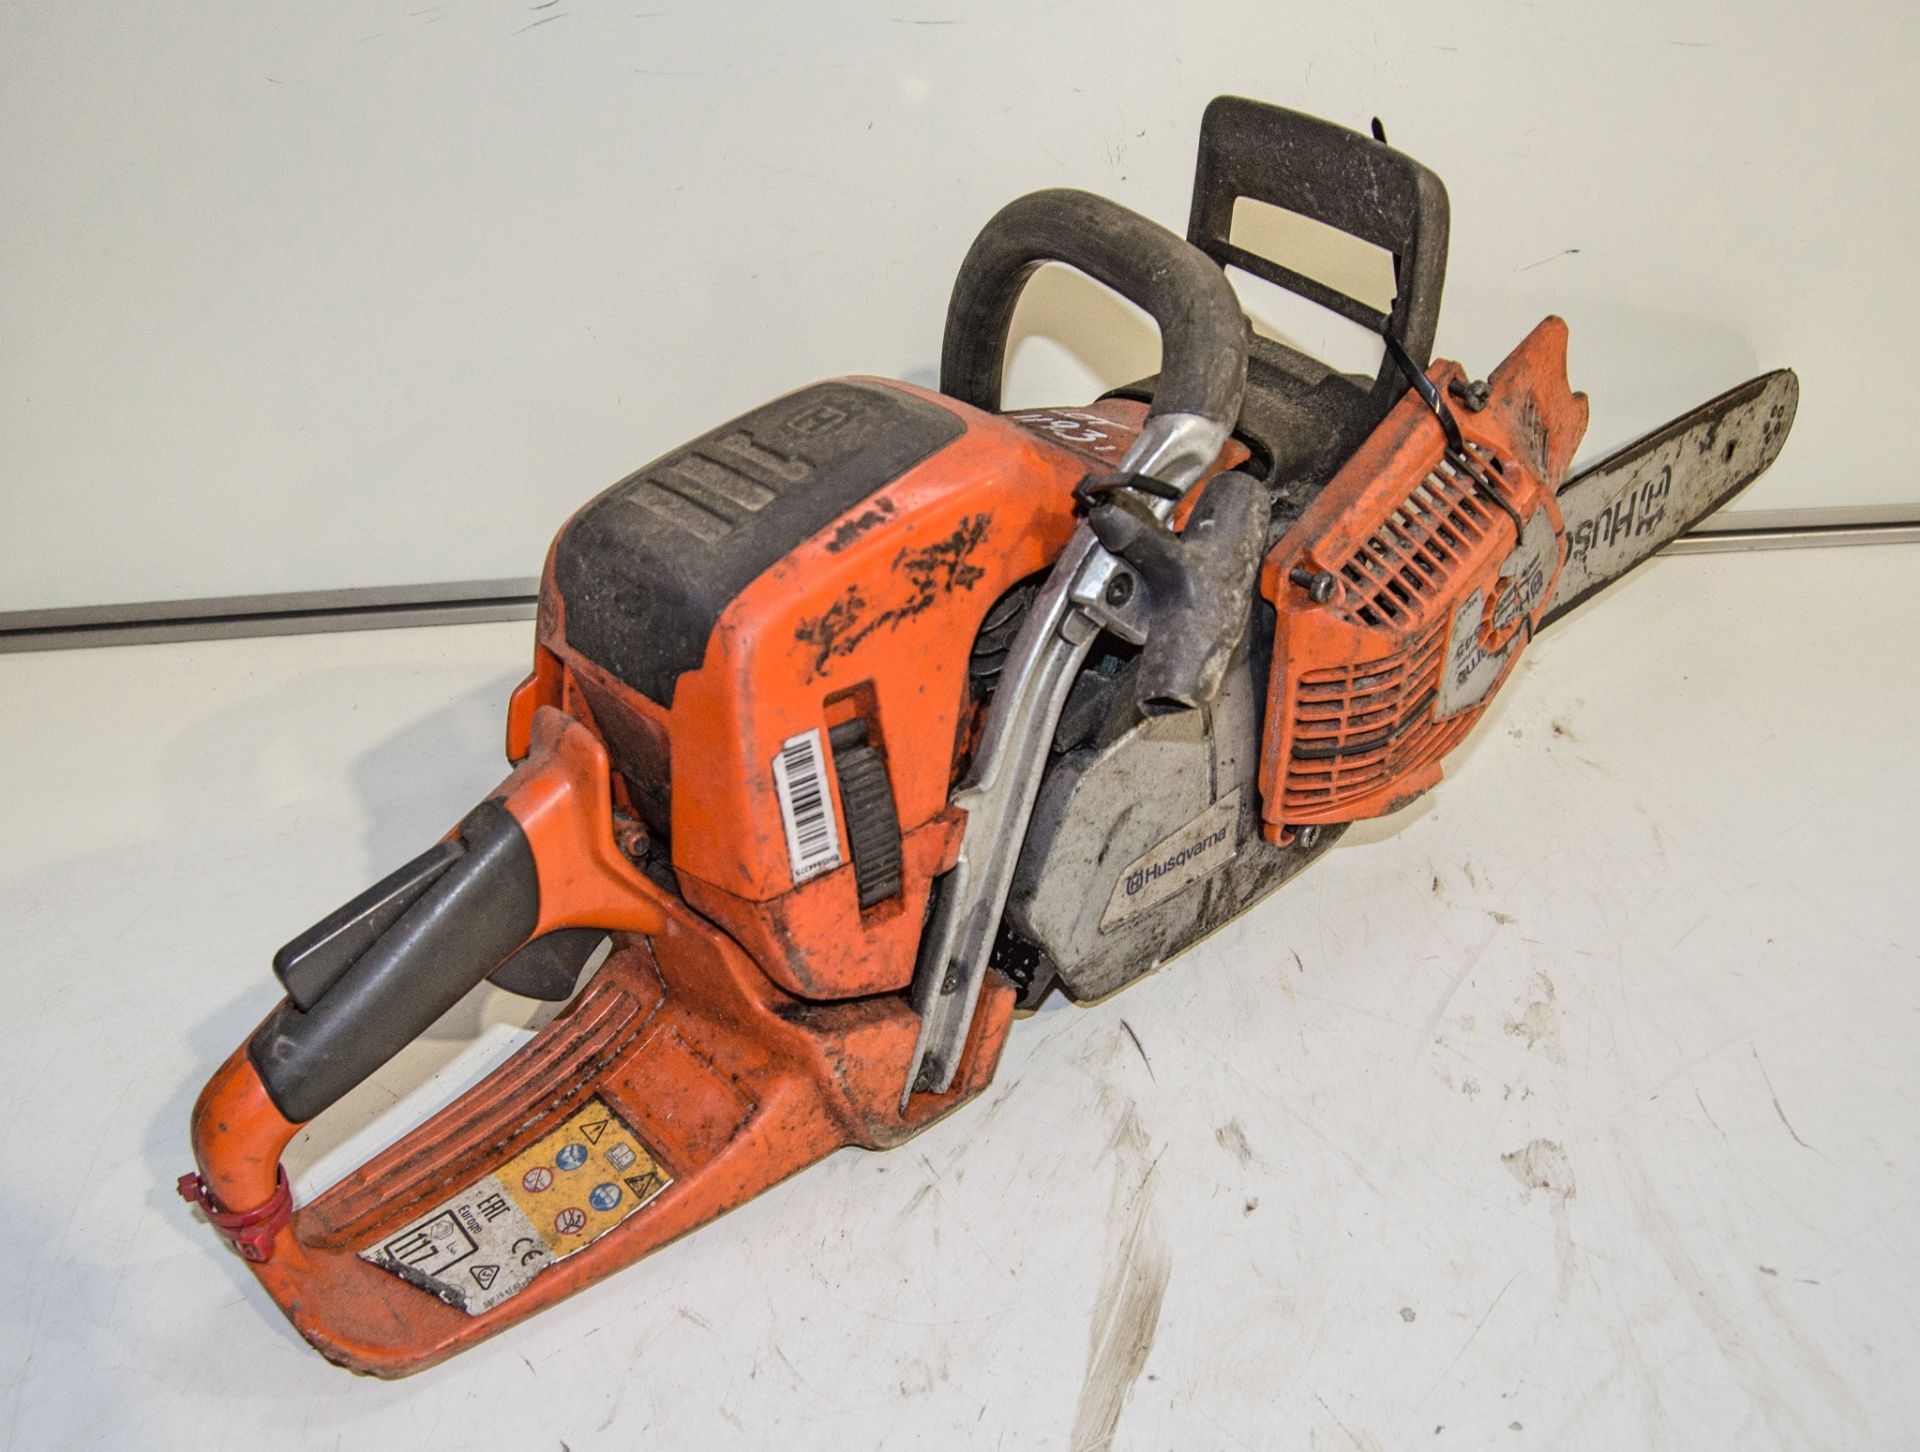 Husqvarna 545 petrol driven chainsaw ** No chain and pull cord assembly dismantled ** 20070206 - Image 2 of 2